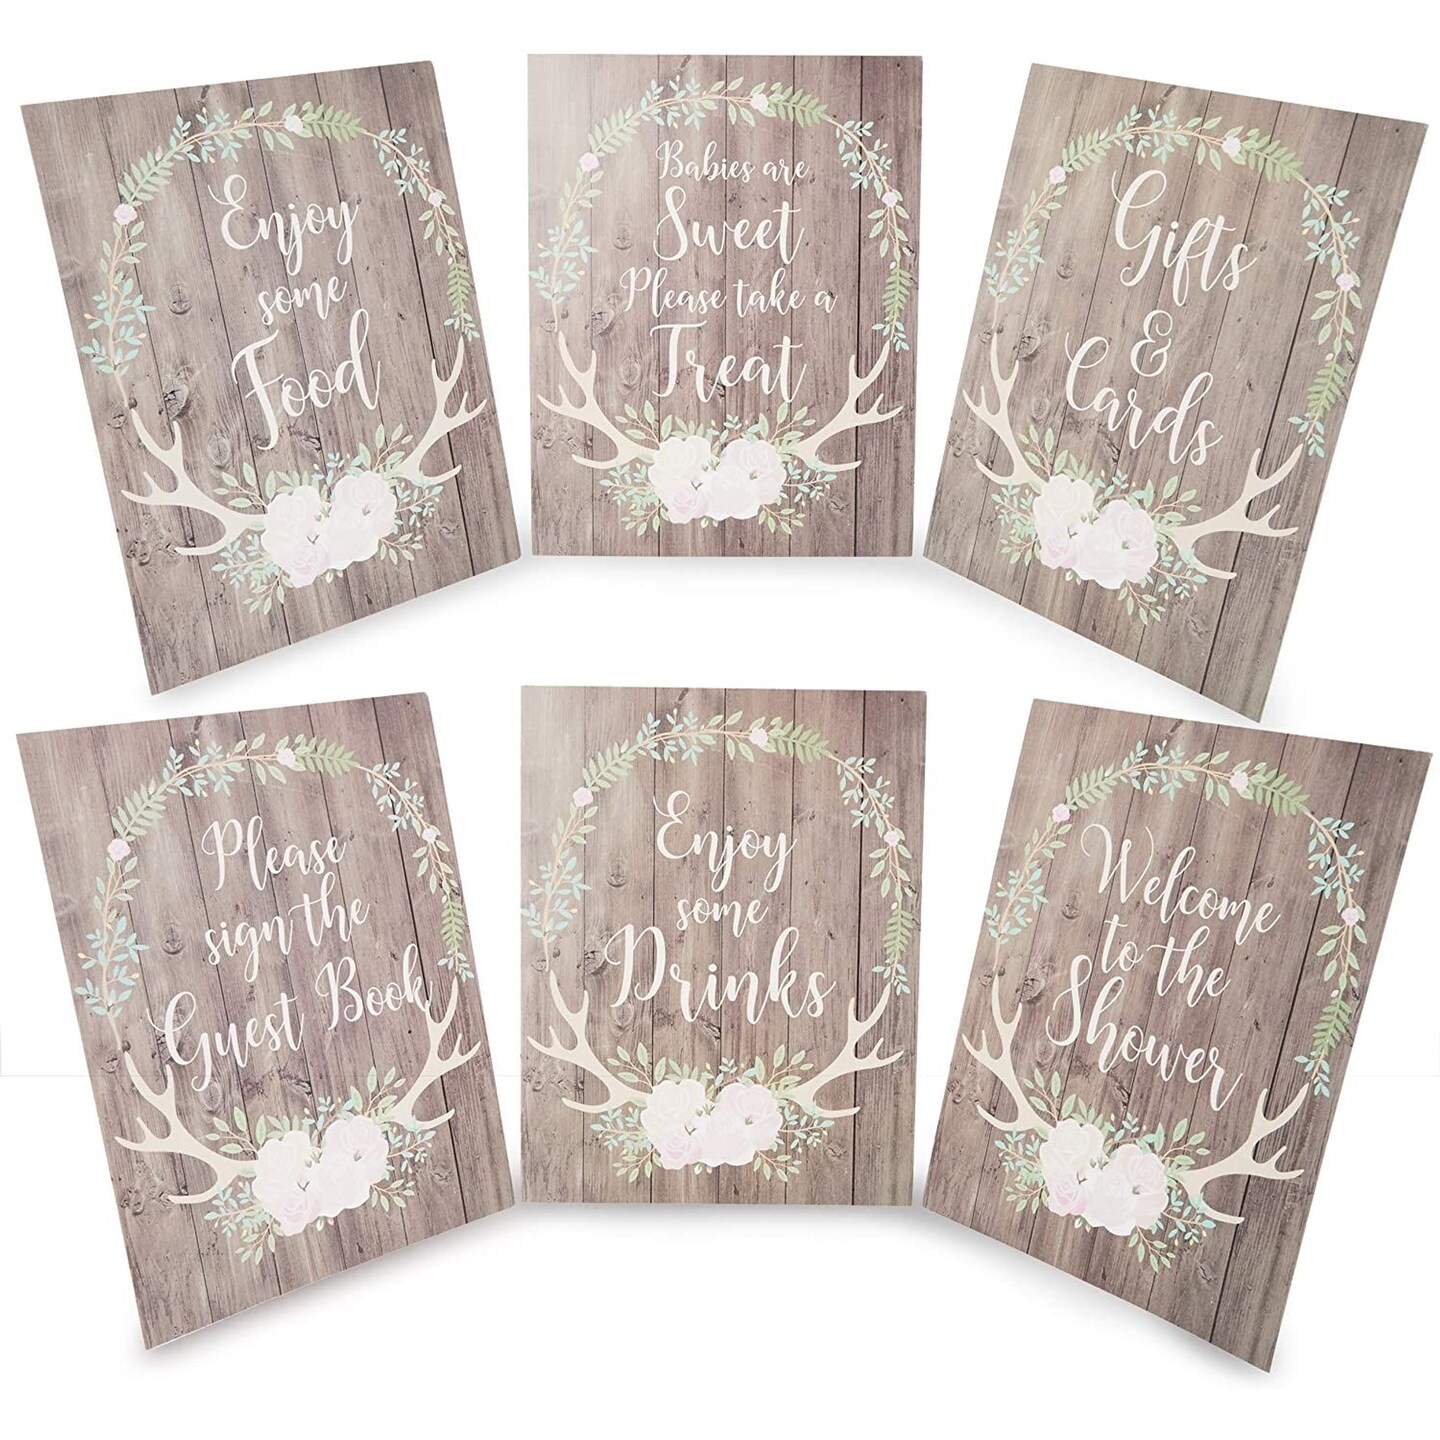 Sparkle and Bash Rustic Baby Shower Table Signs for Decorations (8.5 x 11 in, 6 Pack)